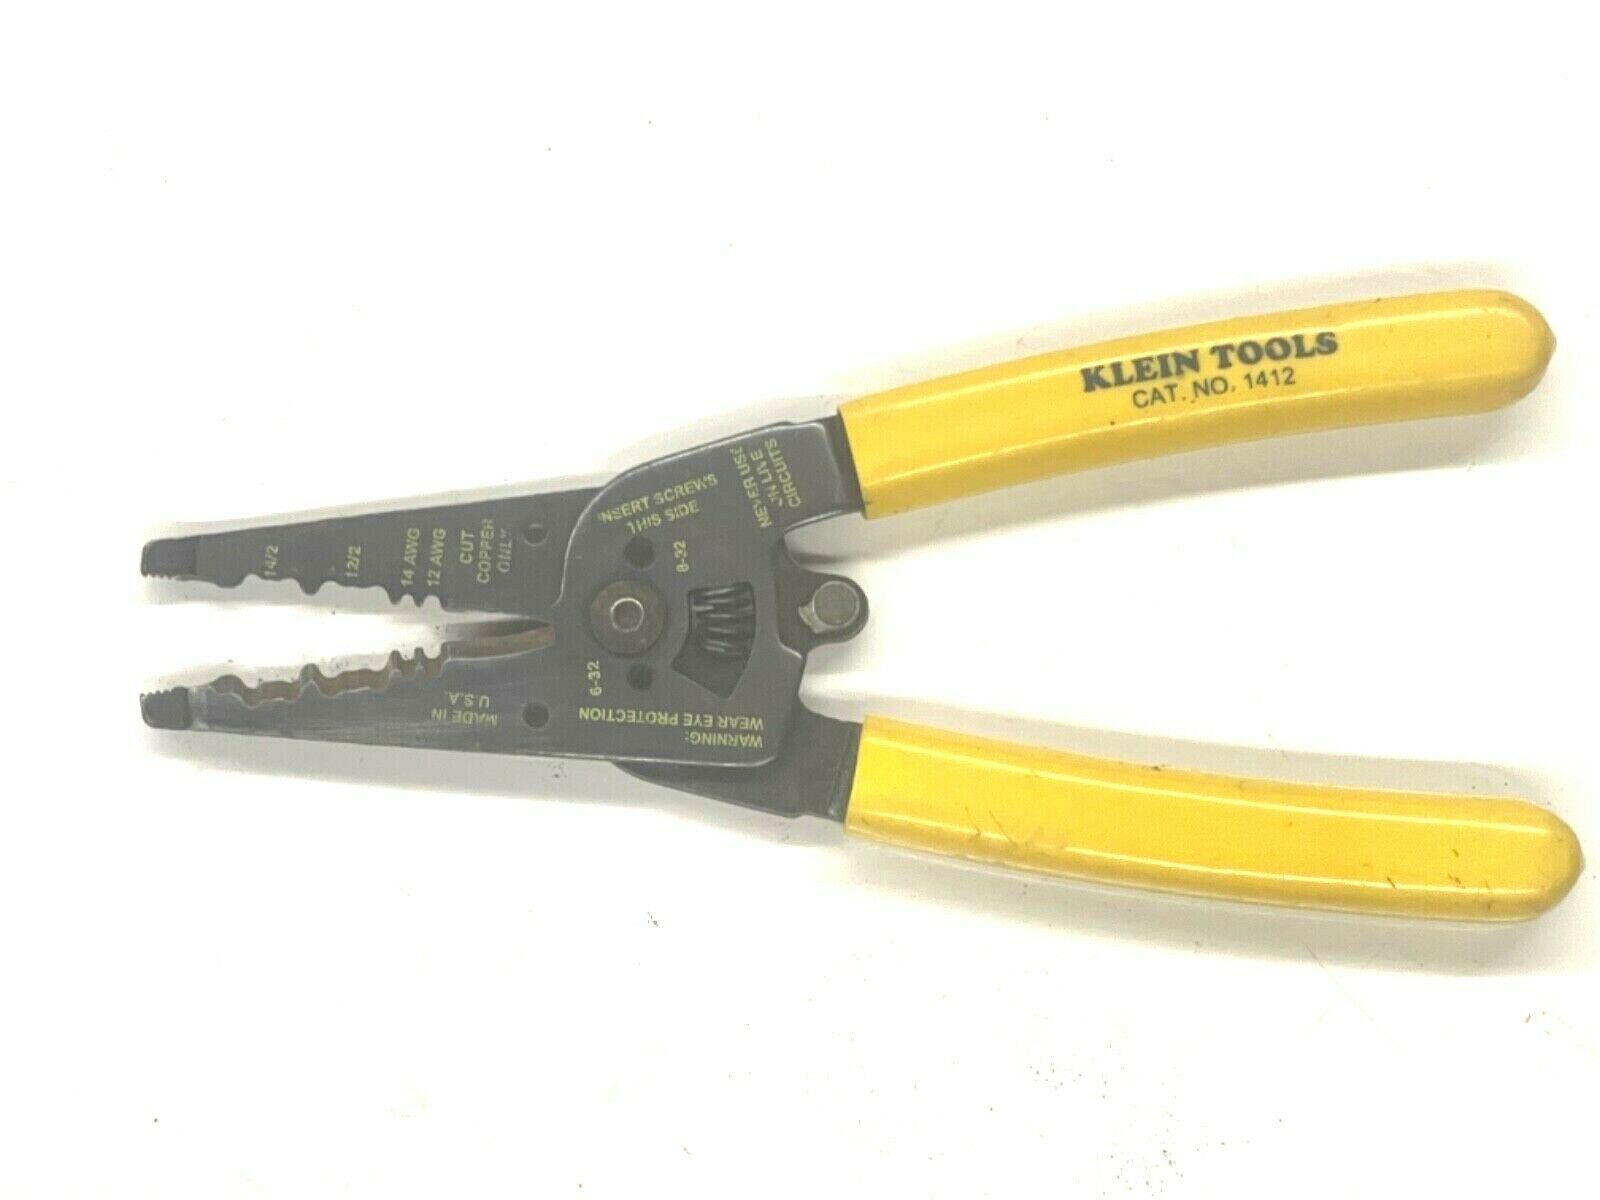 Primary image for Dual NM Cable cable stripper 1412 Klein Tools dual non-metallic 